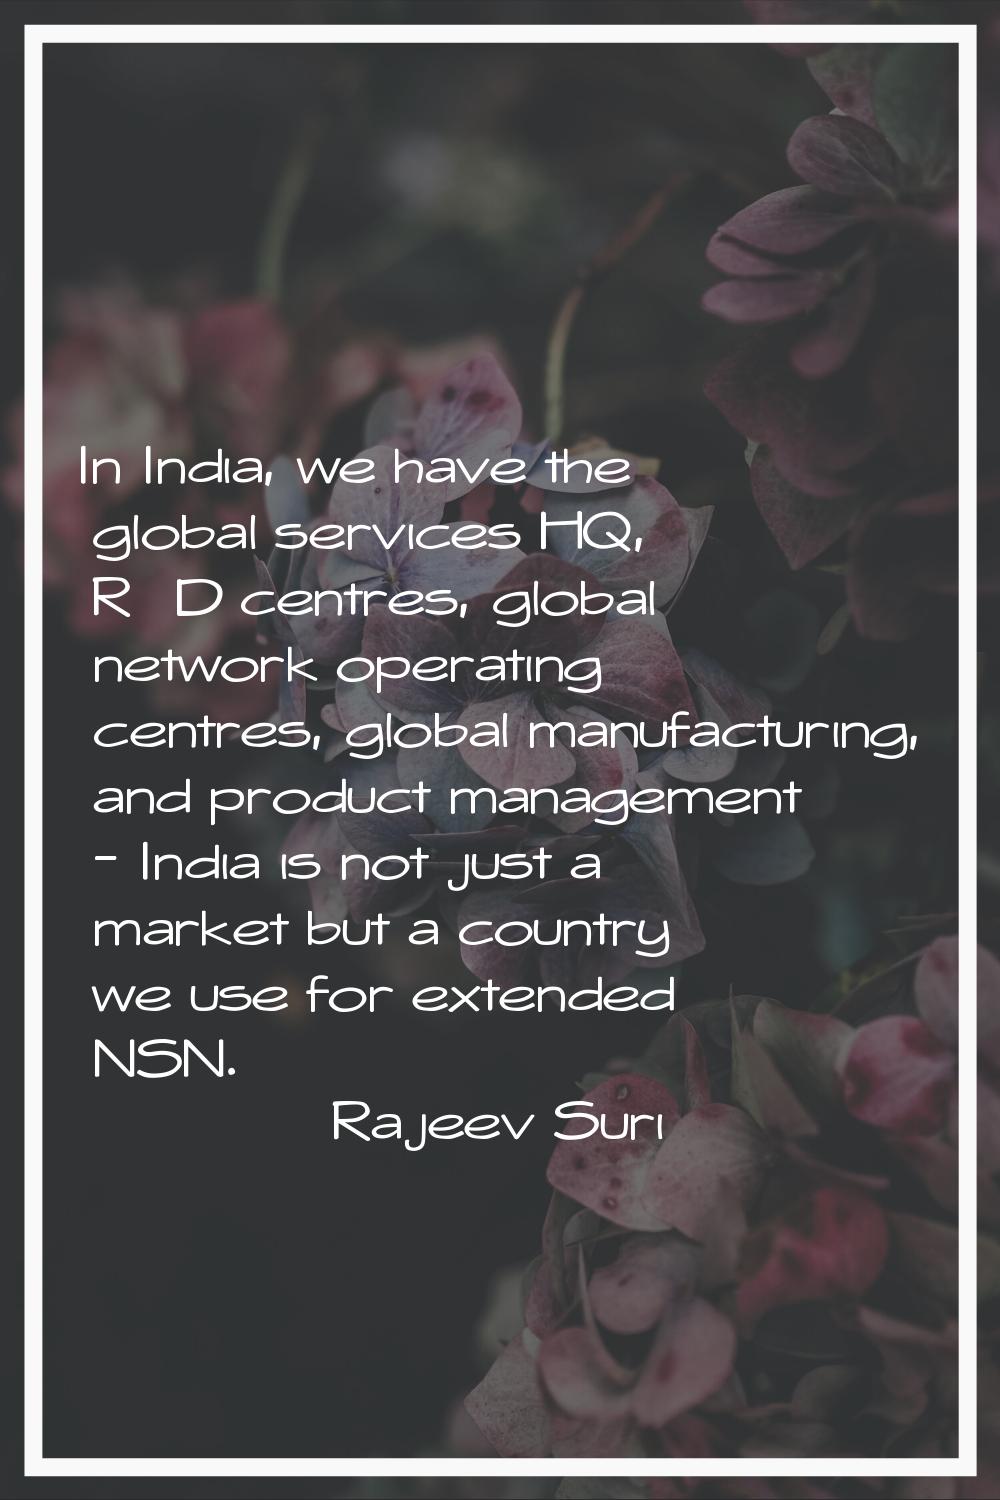 In India, we have the global services HQ, R&D centres, global network operating centres, global man